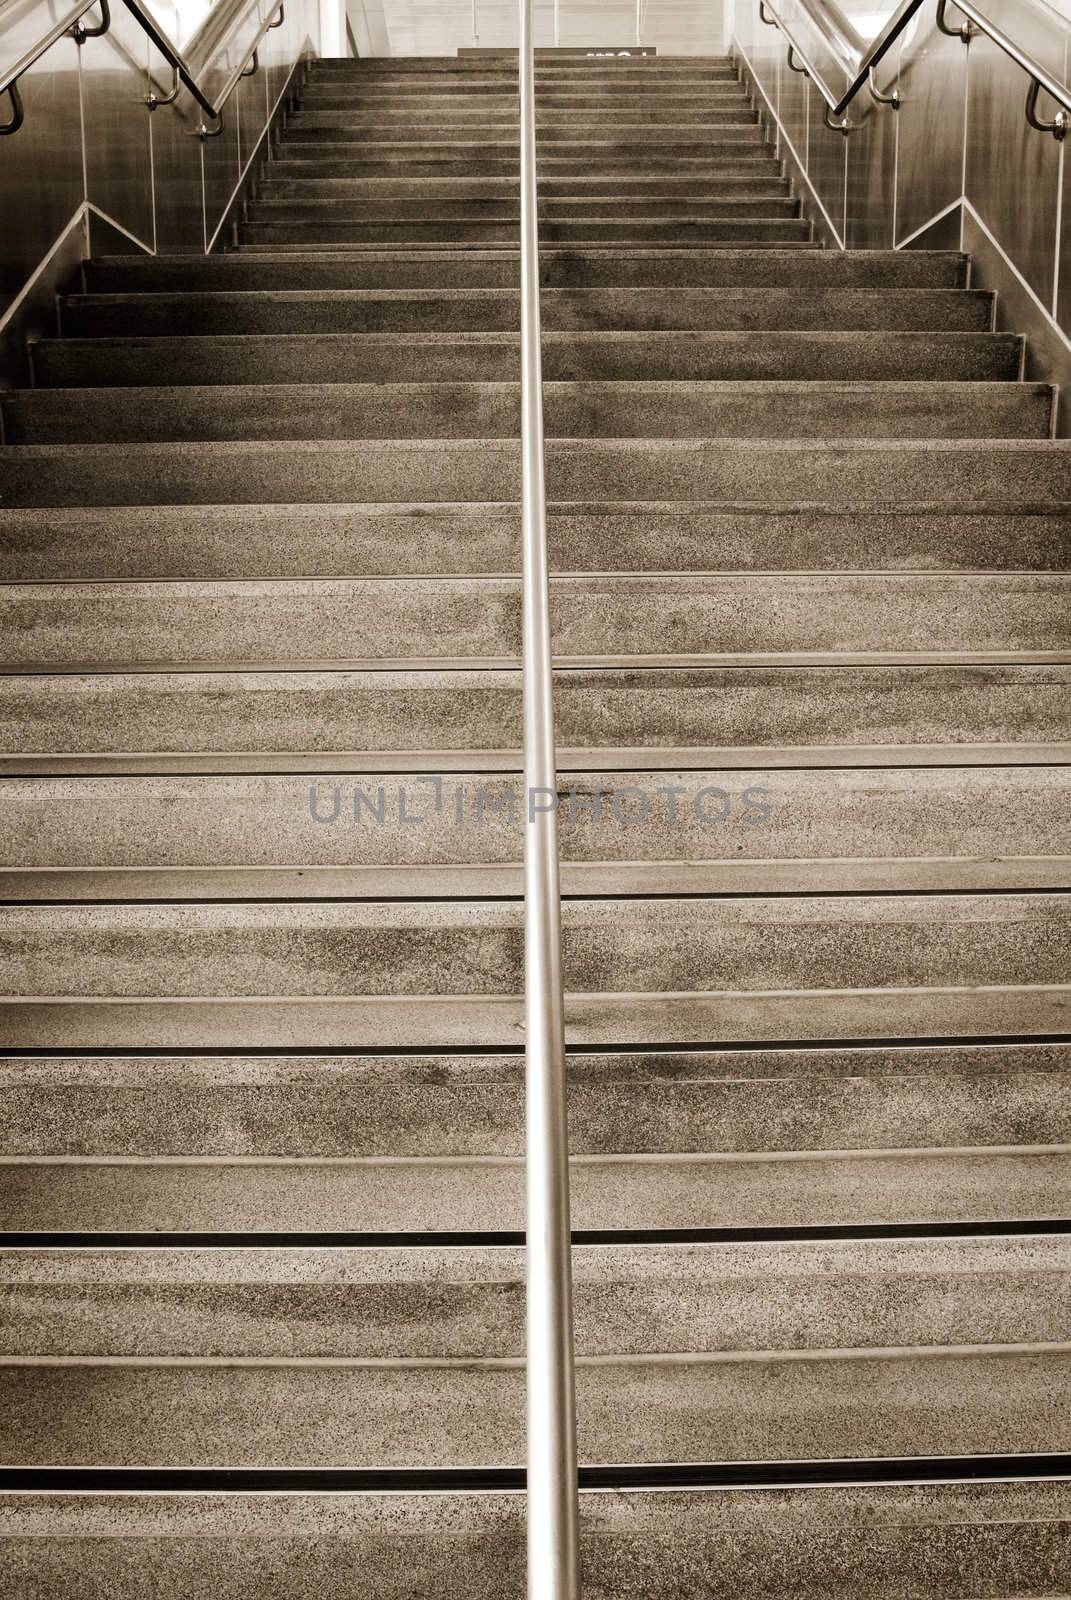 Here are stairs that man can go up or down.